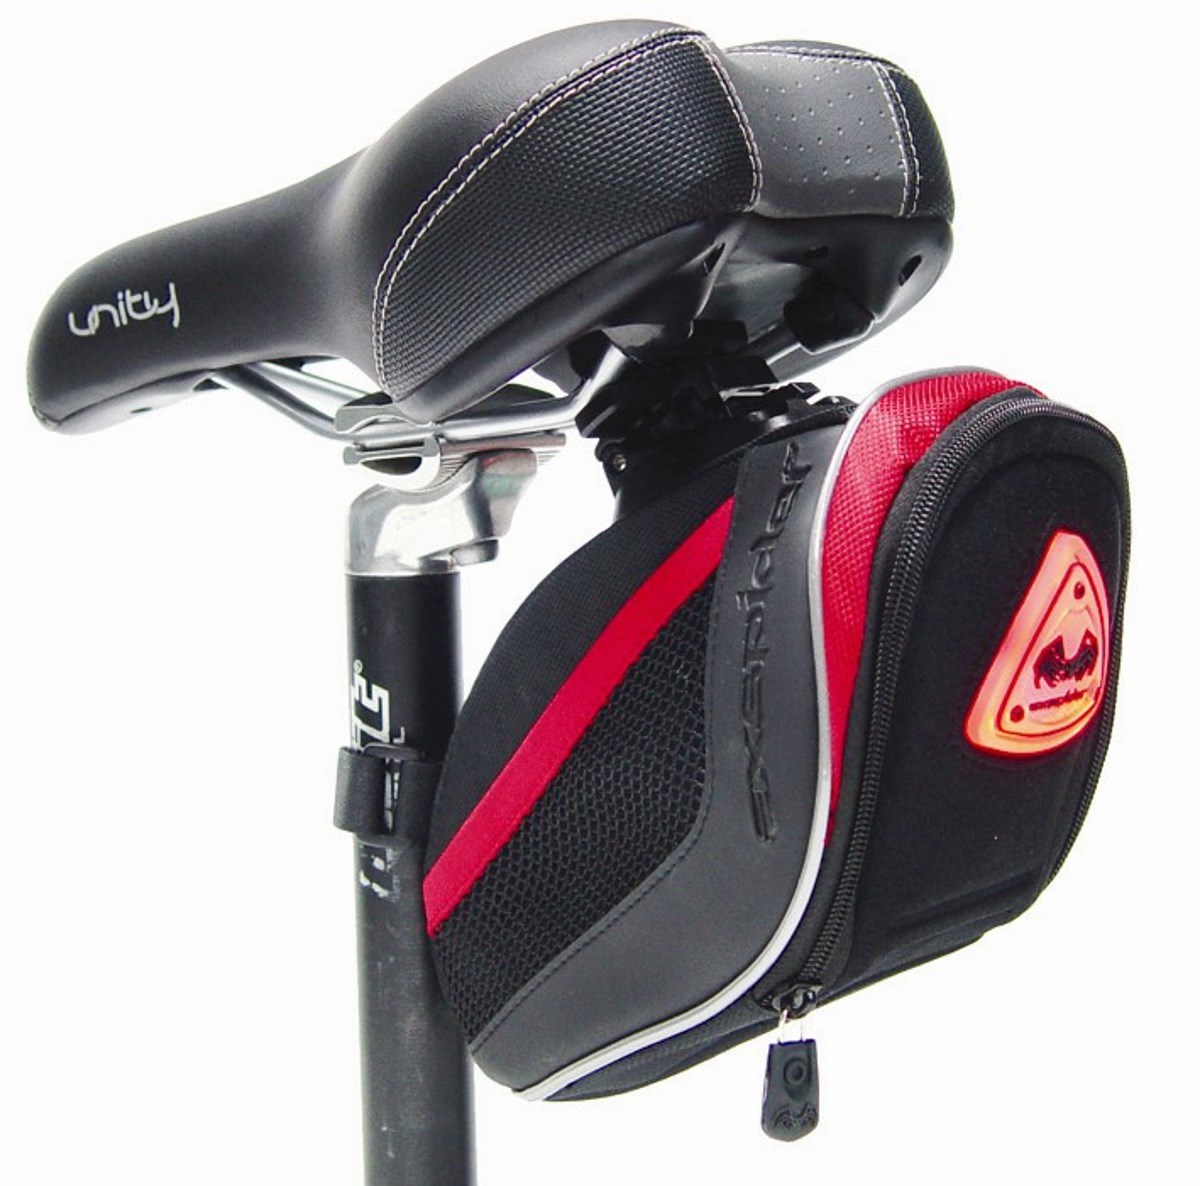 Exspider Seat Bag With LED Light product image